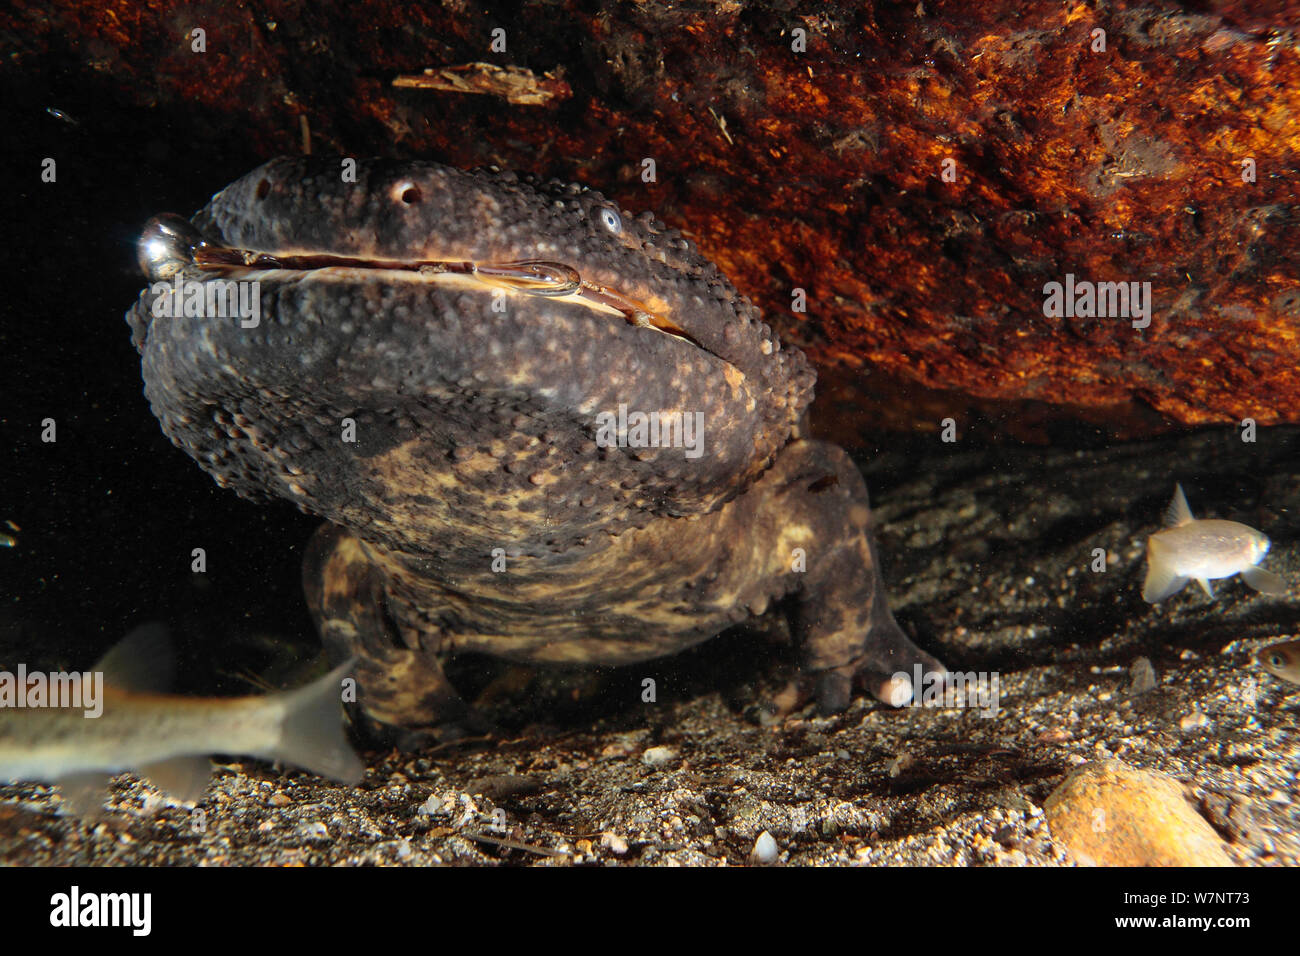 Japanese giant salamander (Andrias japonicus) breathing, Hino River, Tottori, Japan, August. Stock Photo